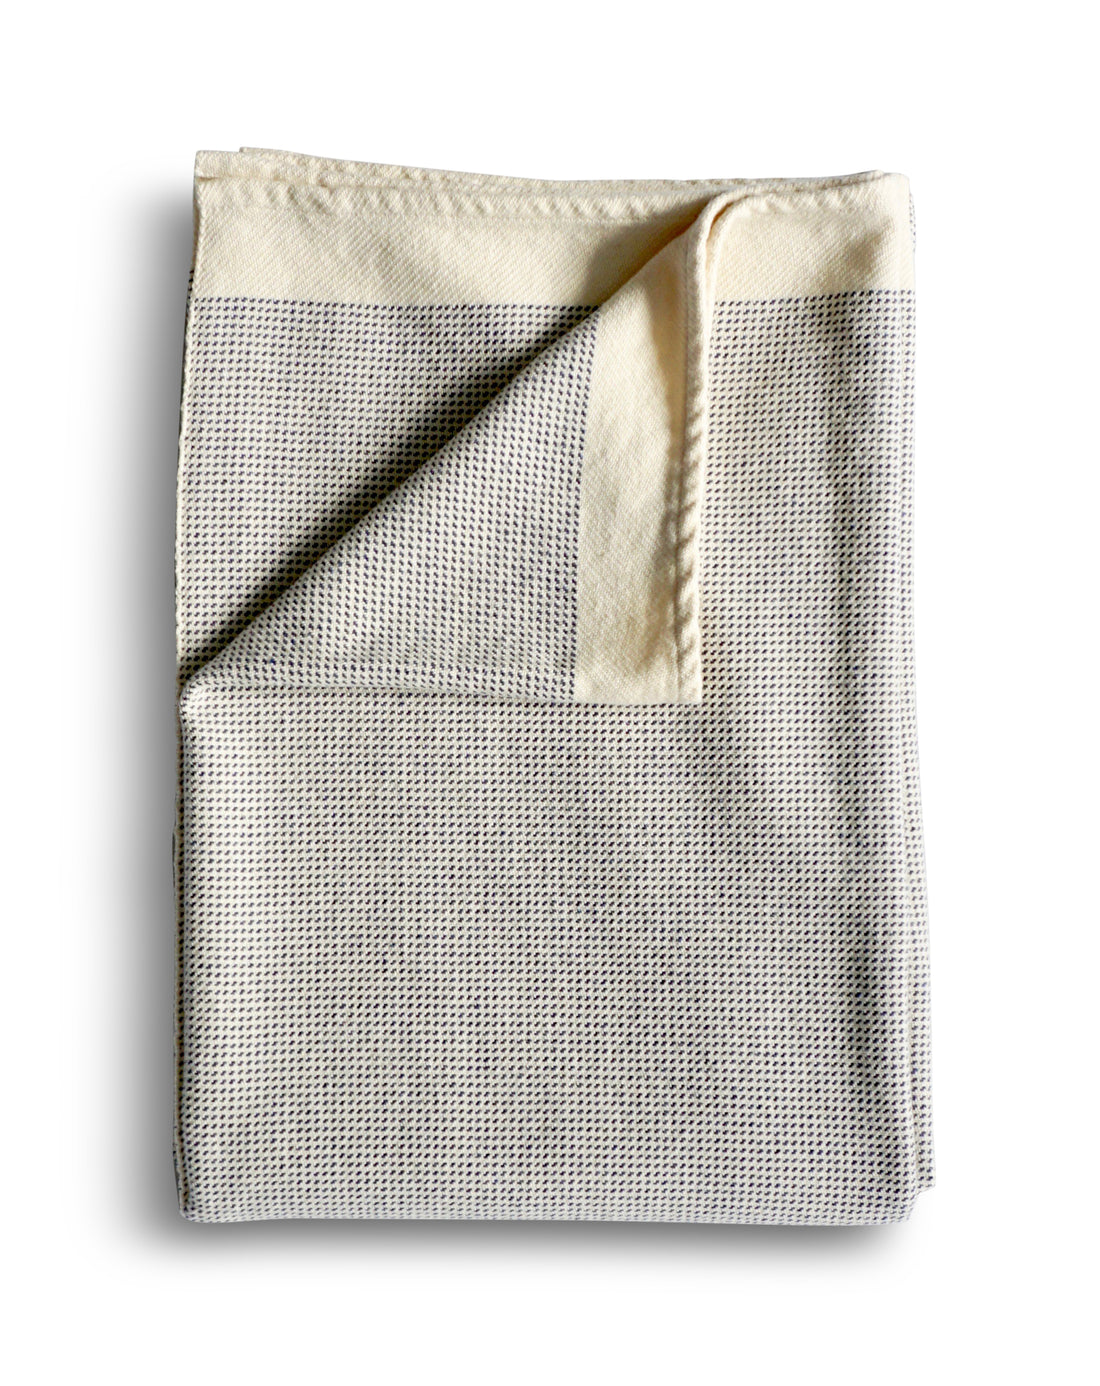 On a white background the combed cotton throw in Denim Dots is folded. The throw is a soft lightweight off-white color with a blue dotted pattern. Made of soft, natural cotton.